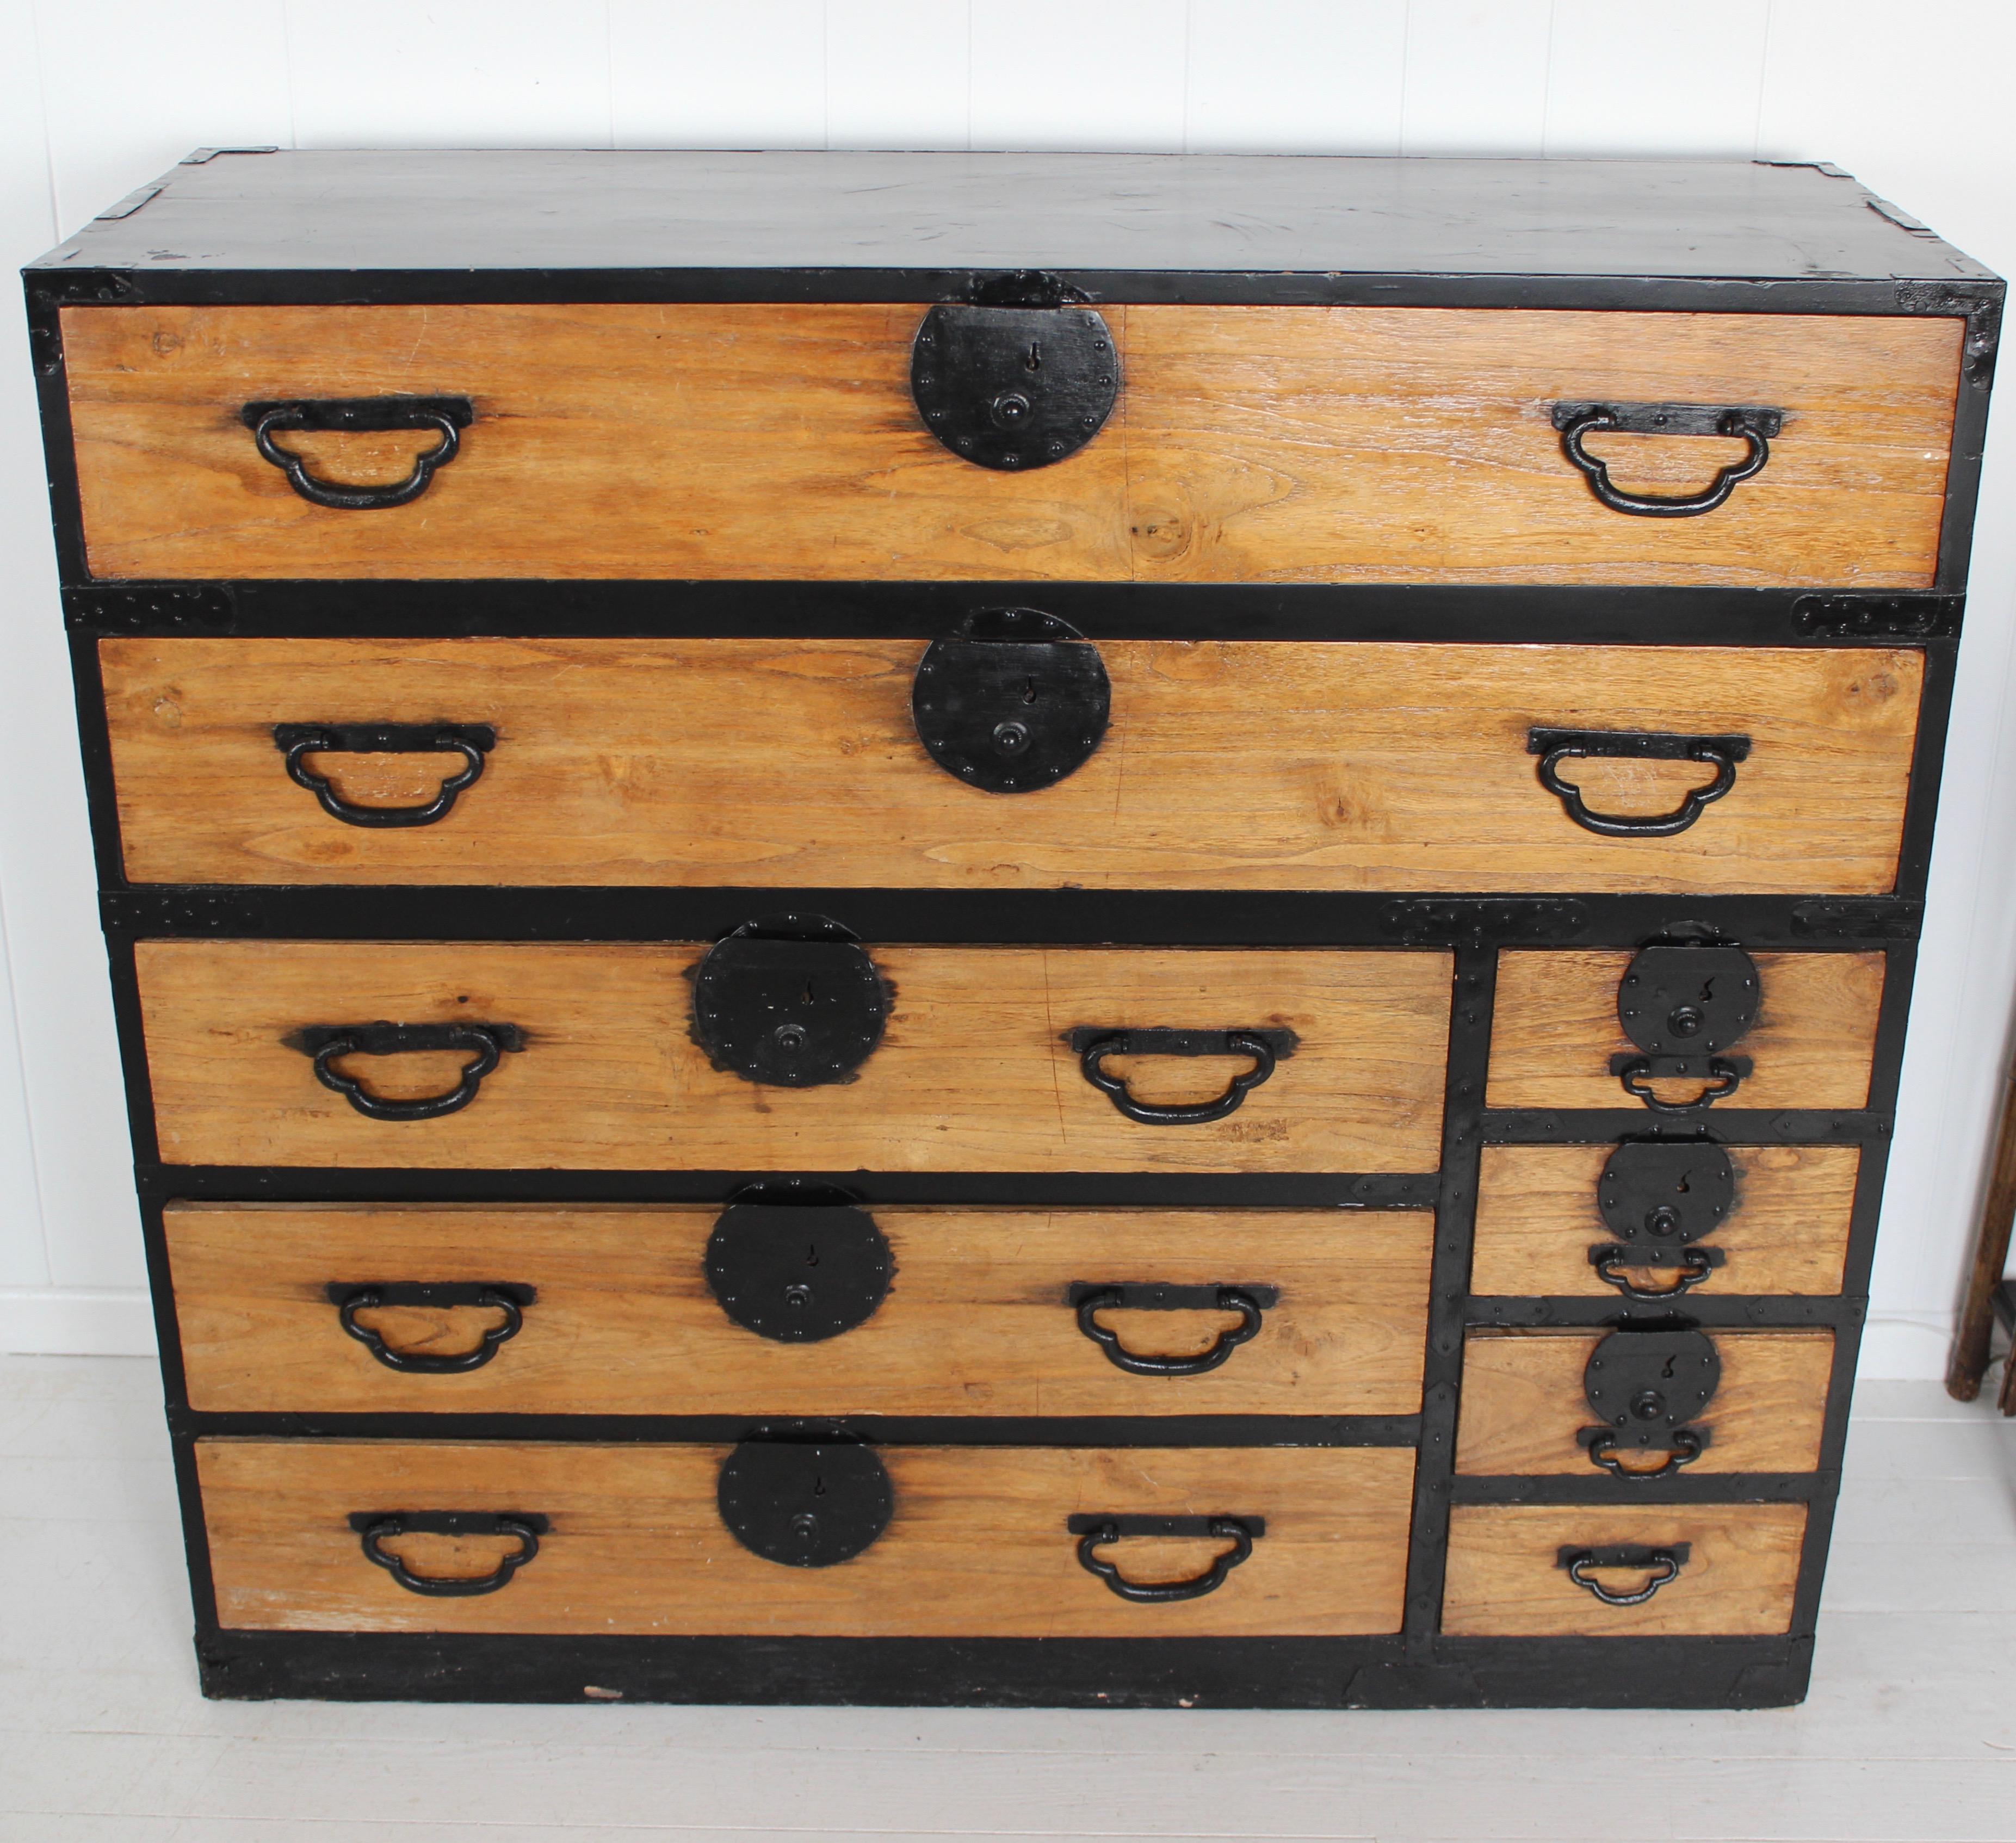 19th century Japanese Tansu chest of drawers.